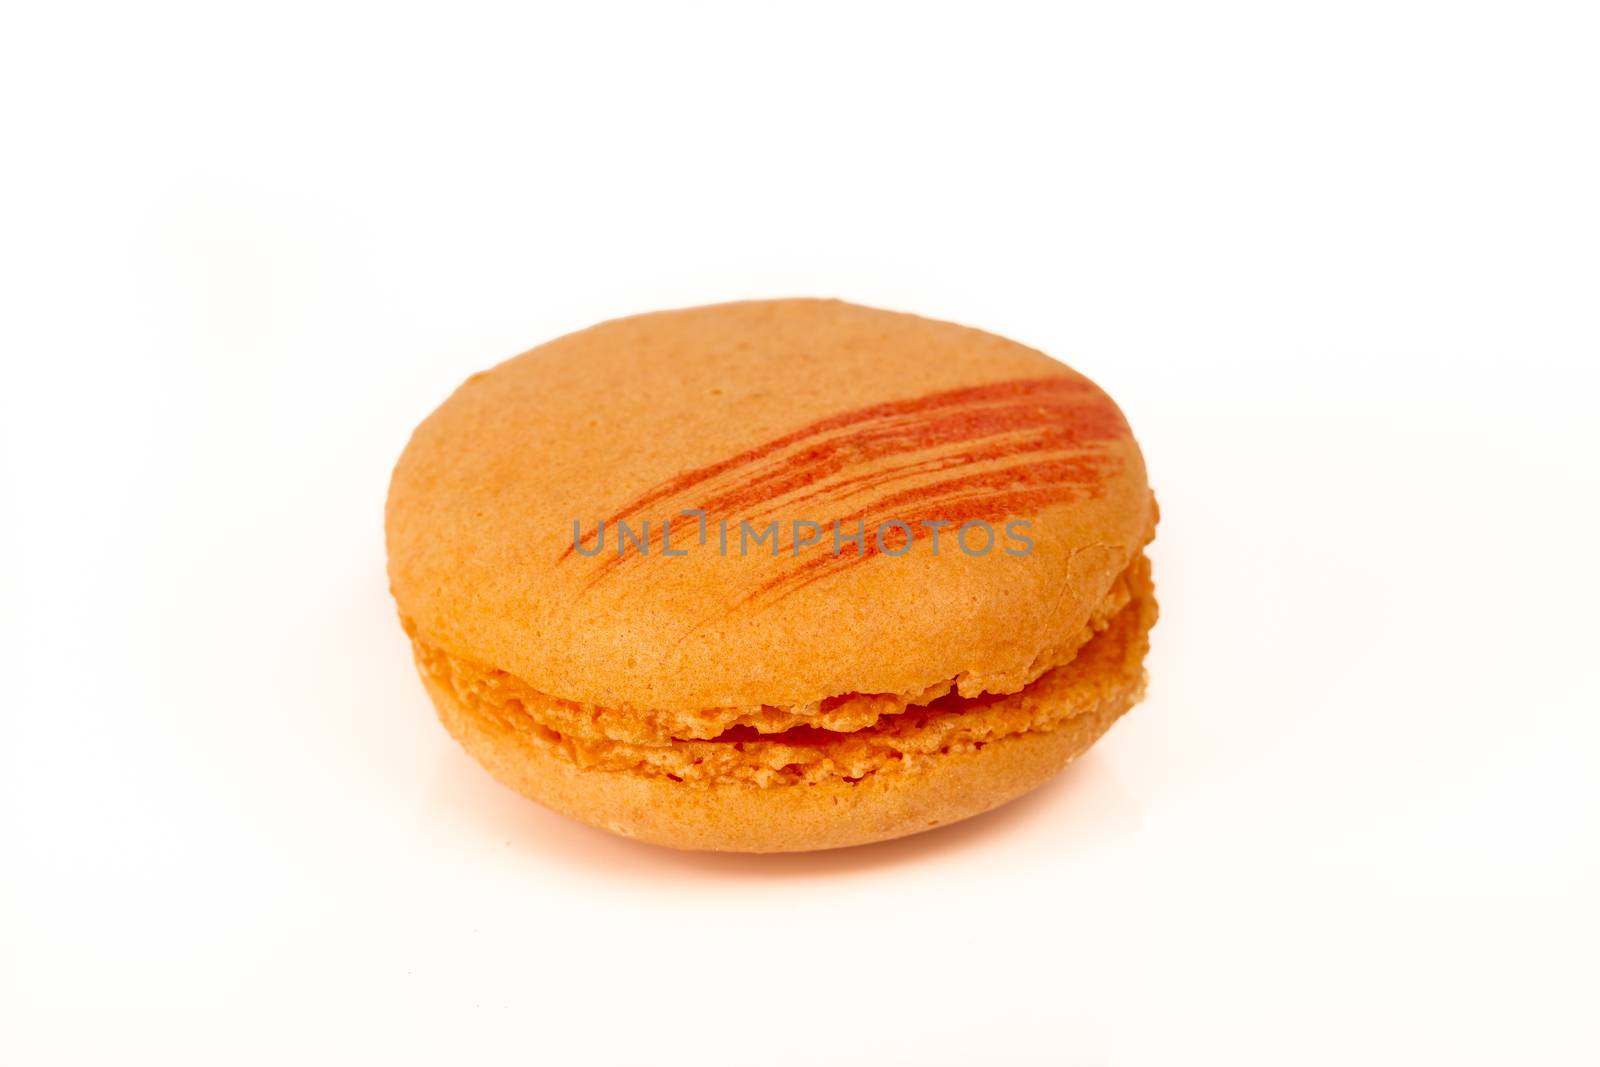 French colorful home made orange macarons  on white bakground